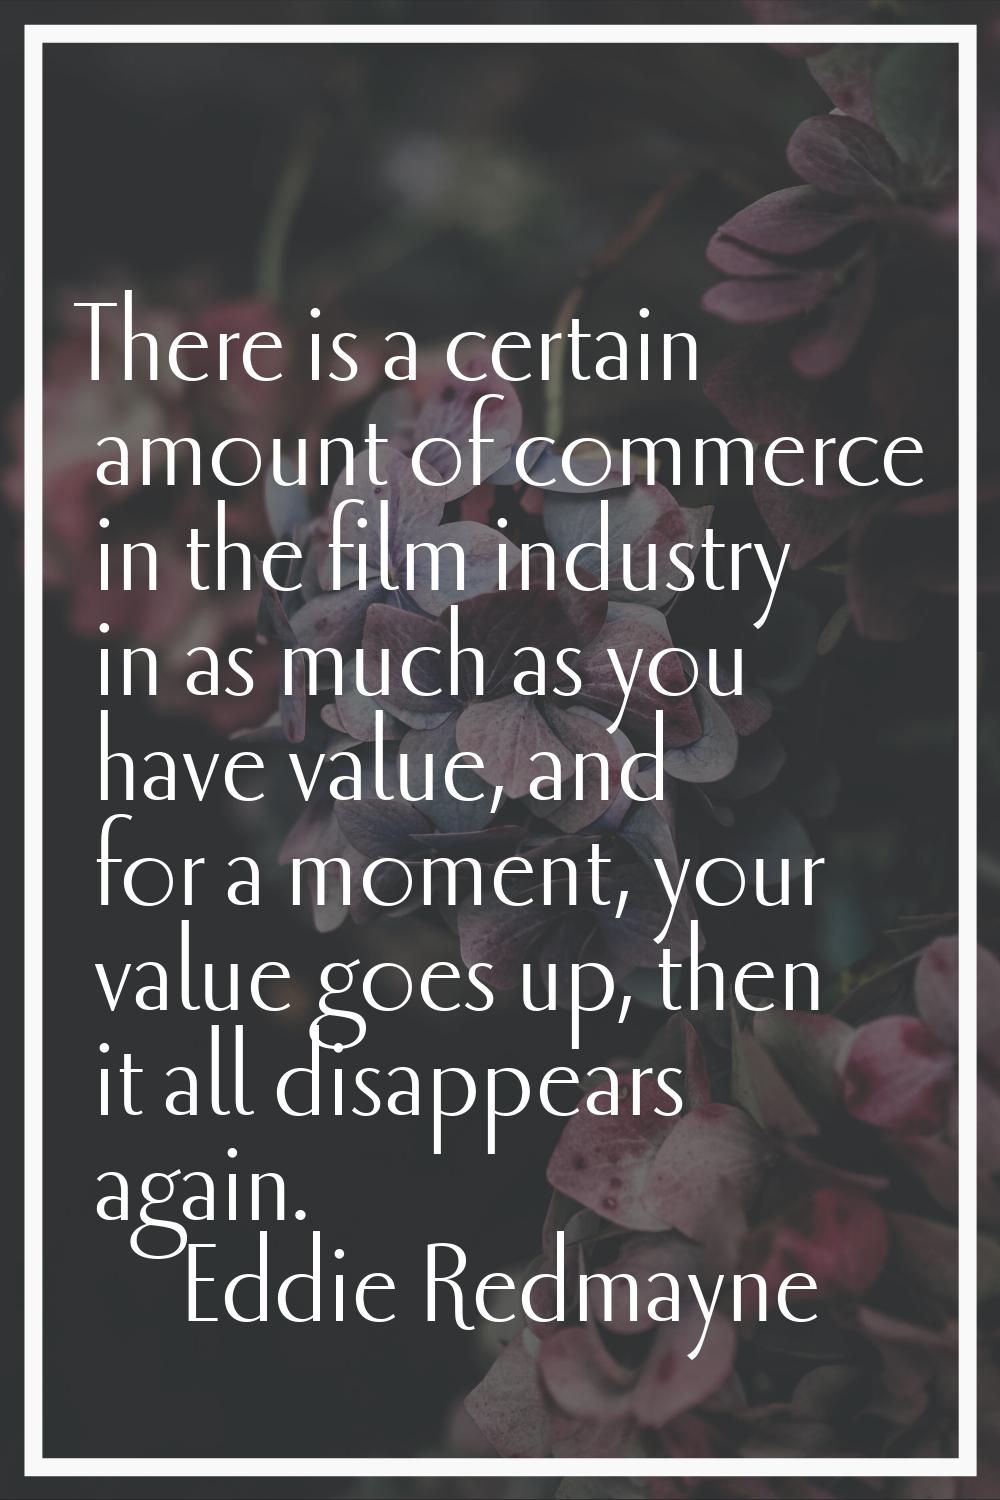 There is a certain amount of commerce in the film industry in as much as you have value, and for a 